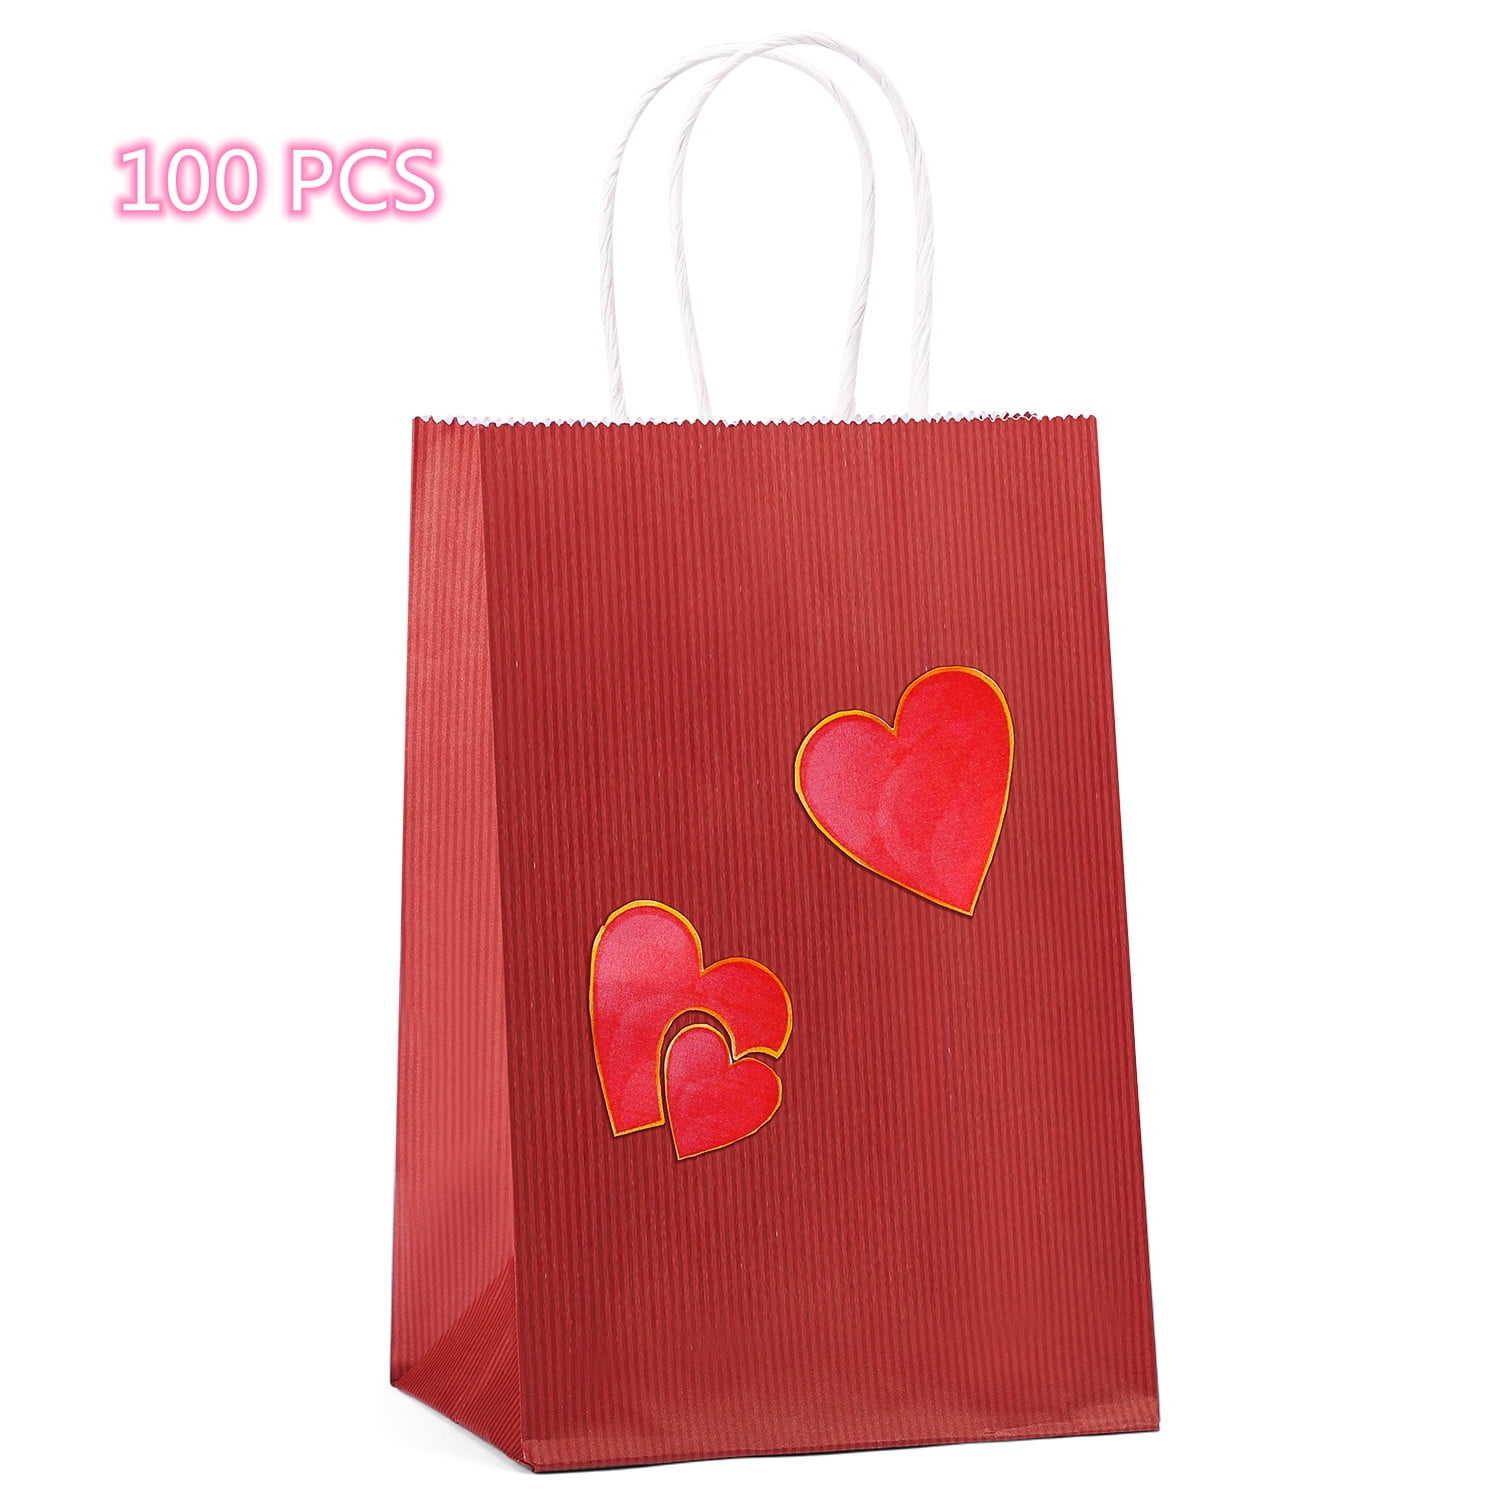 GSSUSA Black Gift Bags 5.25x3.75x8100Pcs GSSUSA Kraft Paper Bag,Party Bags,Retail Bags,Shopping Bags,Brown Paper Bags with Handles 100% Recyclable Paper 